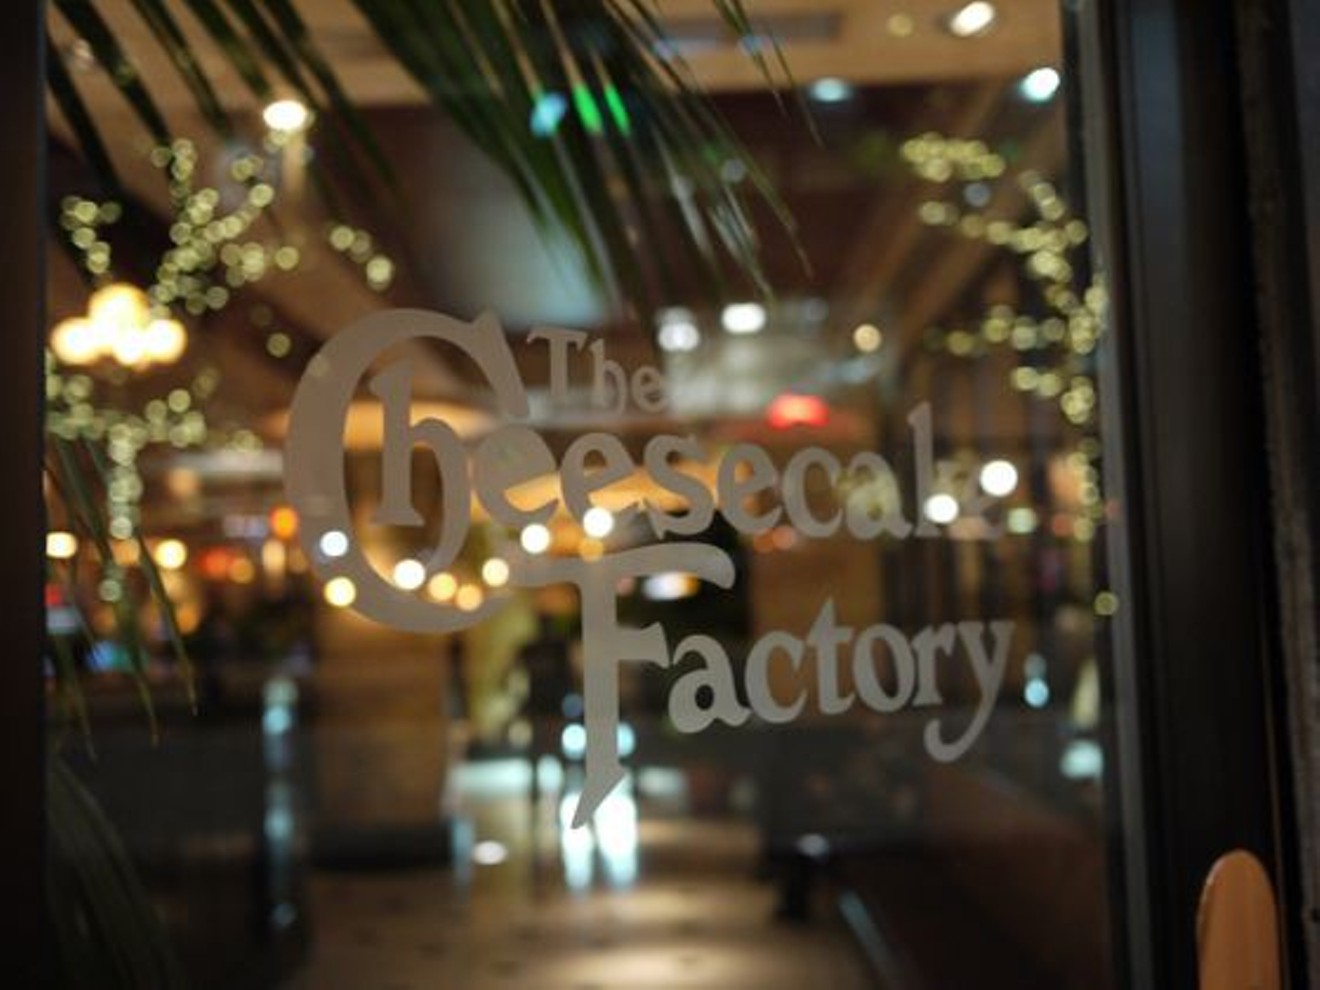 All hail the mighty Cheesecake Factory